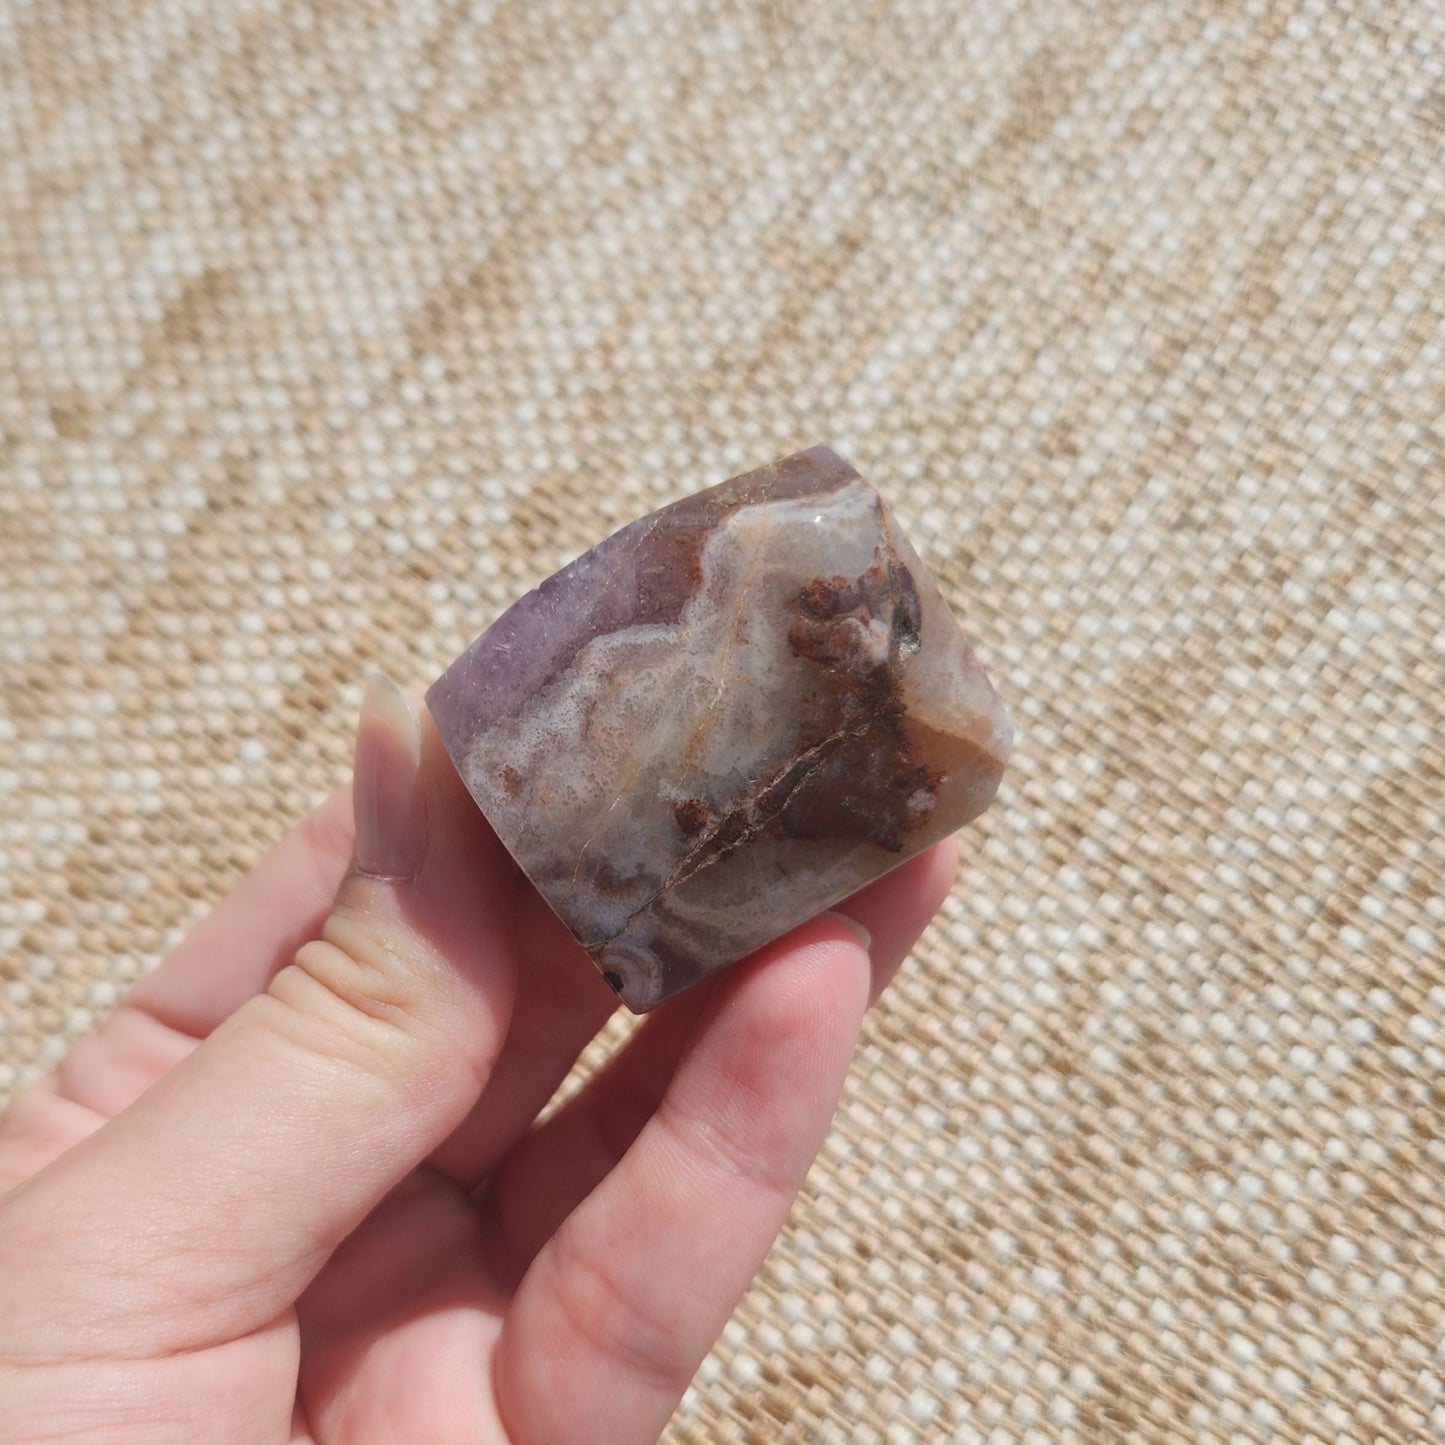 Amethyst and Crazy Lace Agate Freeform 75g